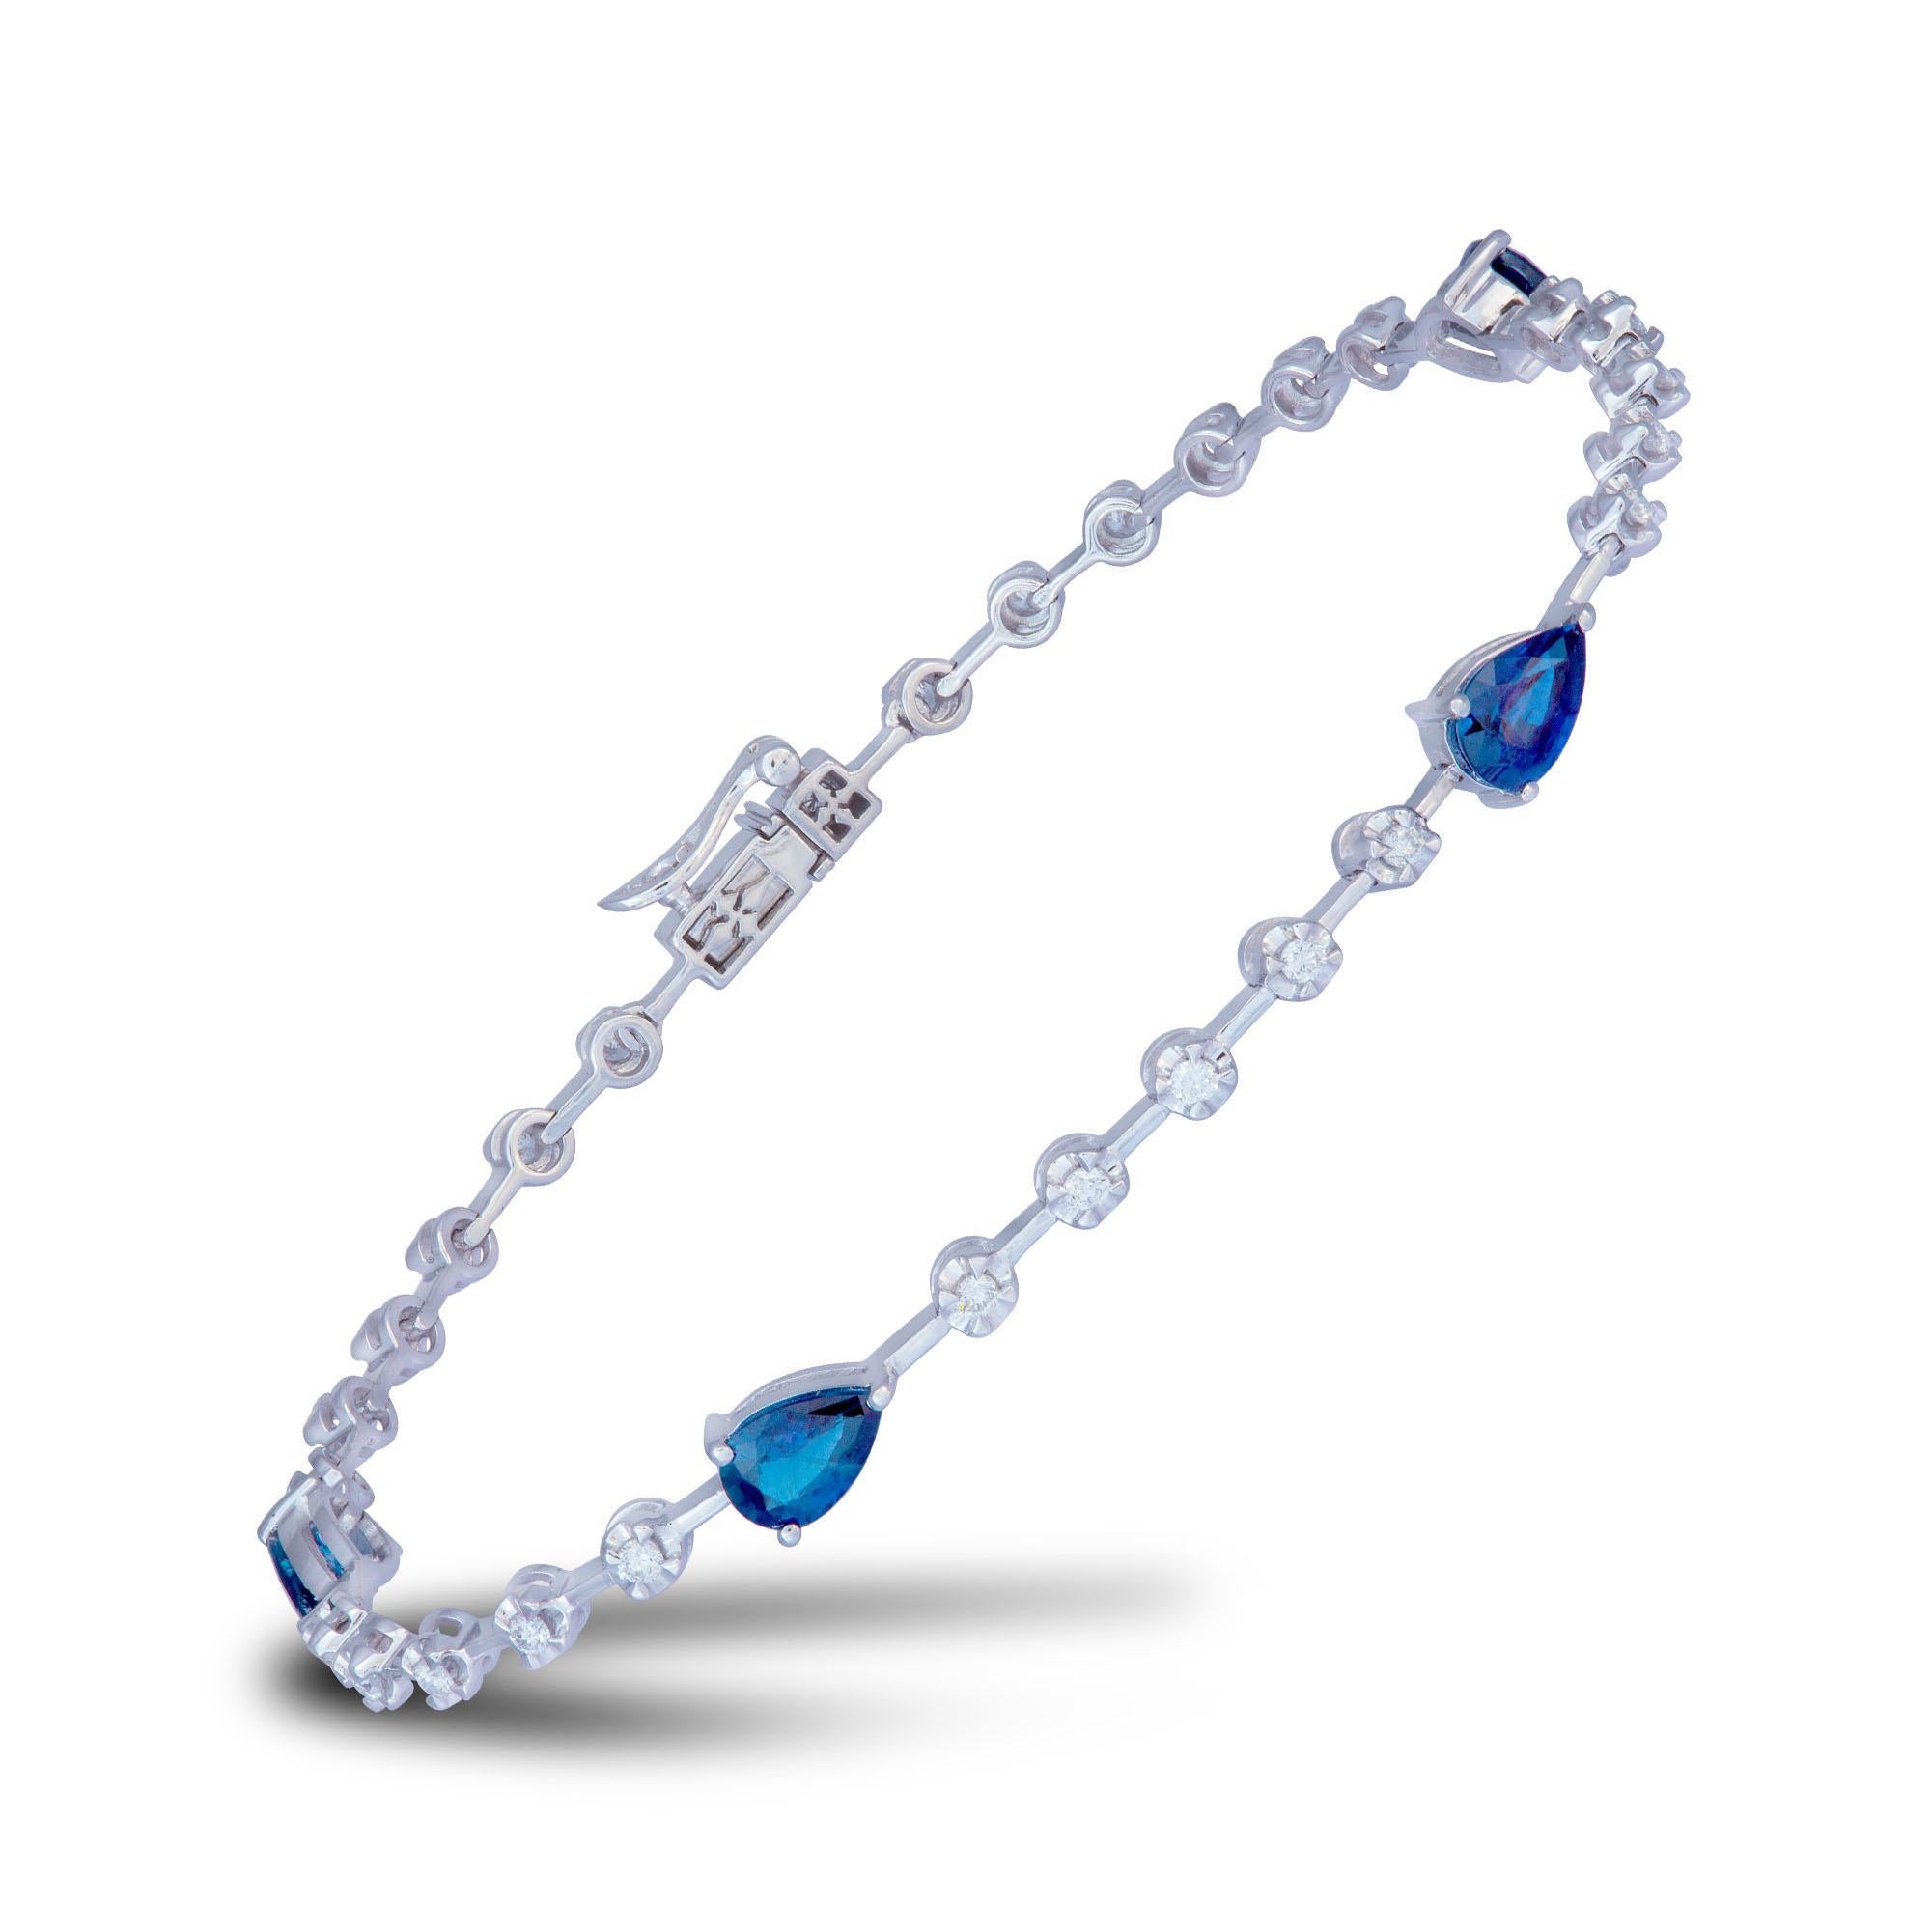 Diamond Tennis Bracelet 18k White Gold Blue Sapphire 2.14 Ct/4 Pcs Diamond 0.39 In New Condition For Sale In Montreux, CH